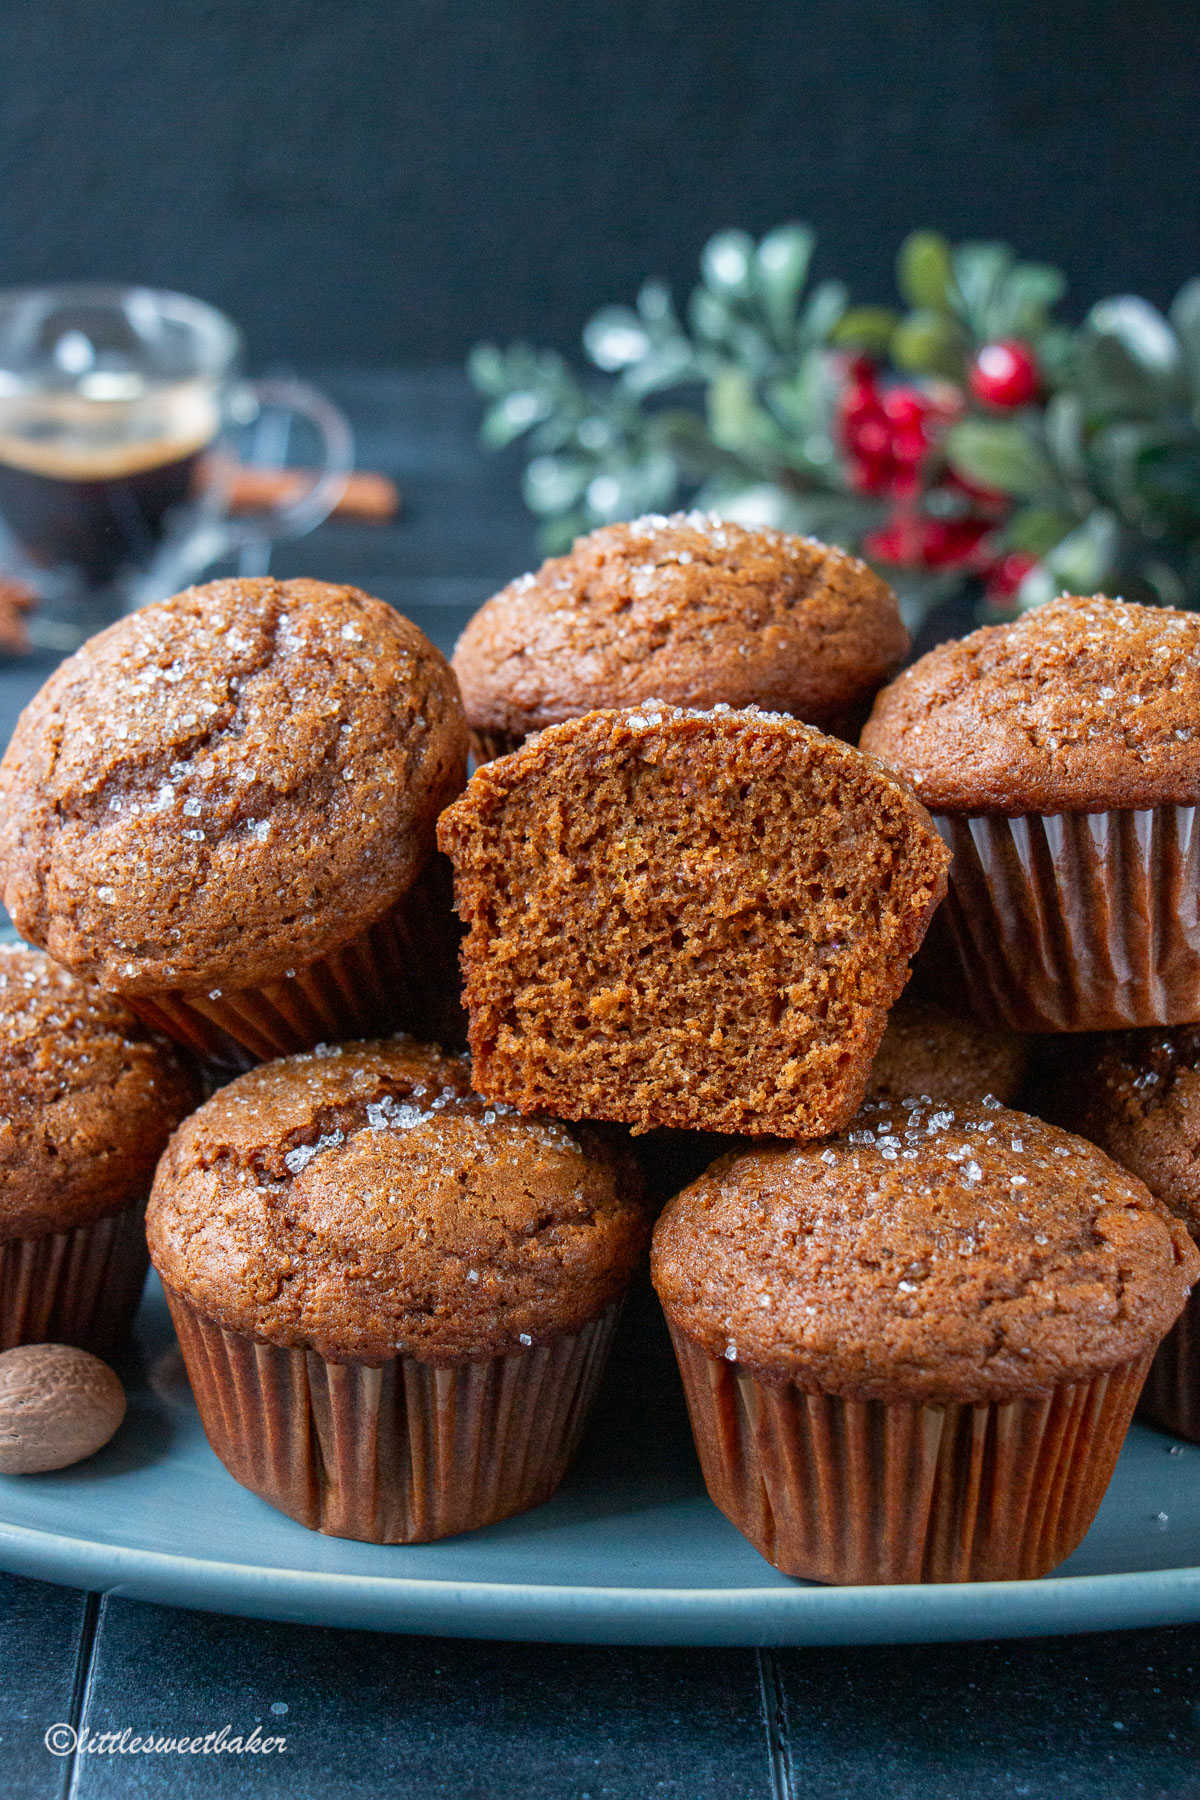 Gingerbread muffins piled on a blue plate with one cut in half.